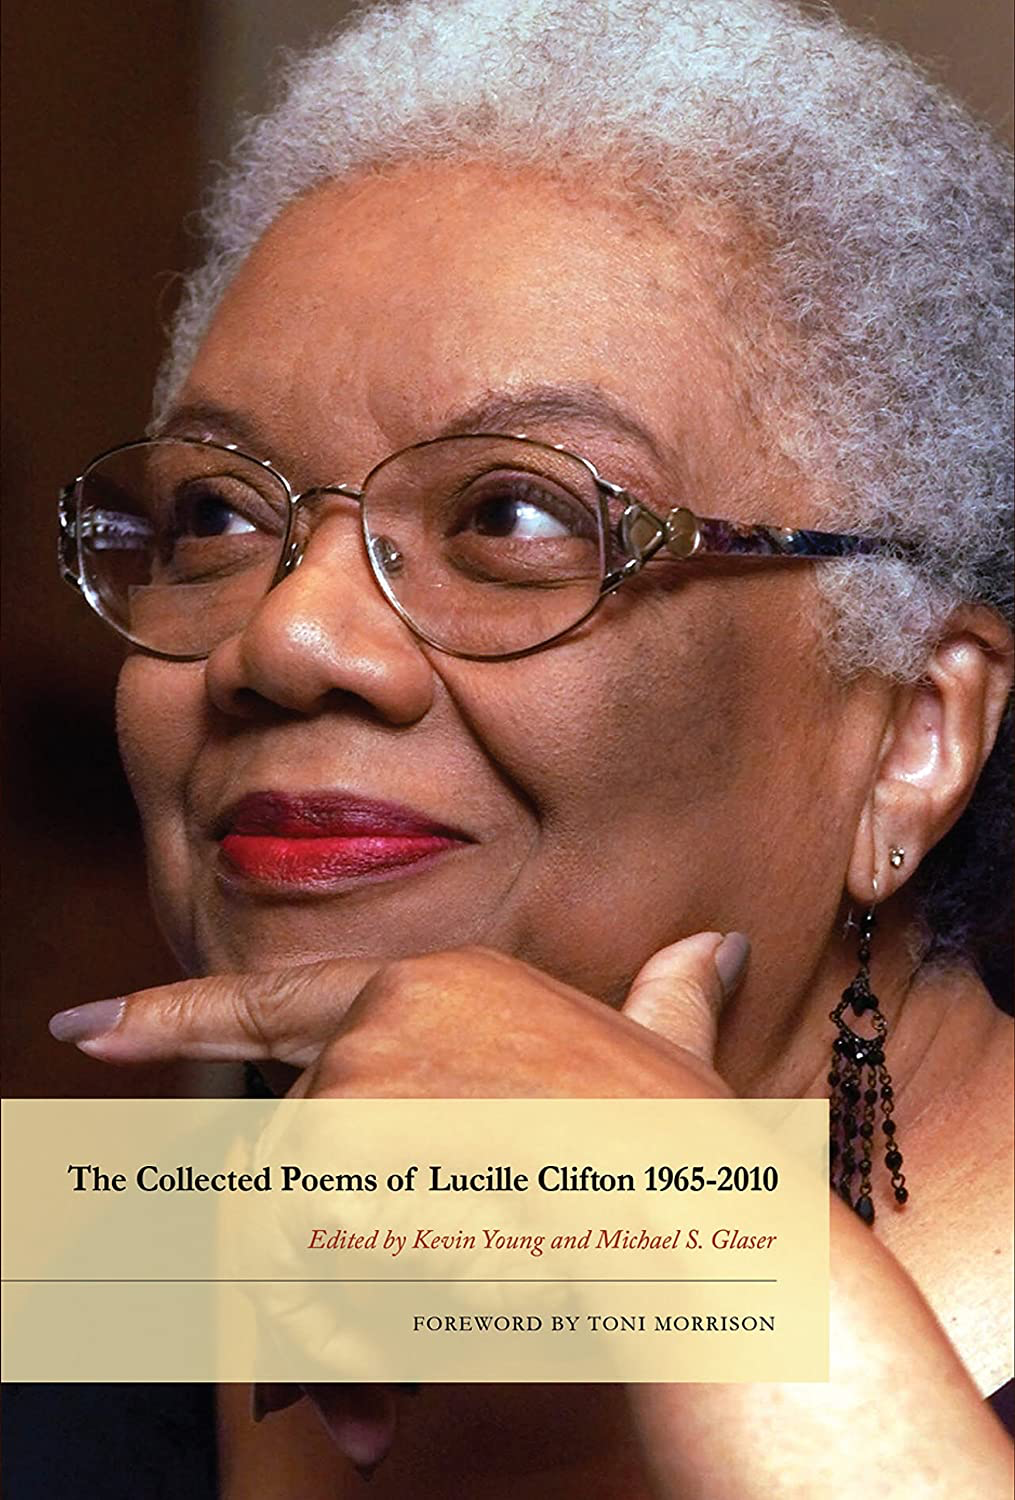 The Collected Poems of Lucile Clifton 1965-2010 (Hardcover)